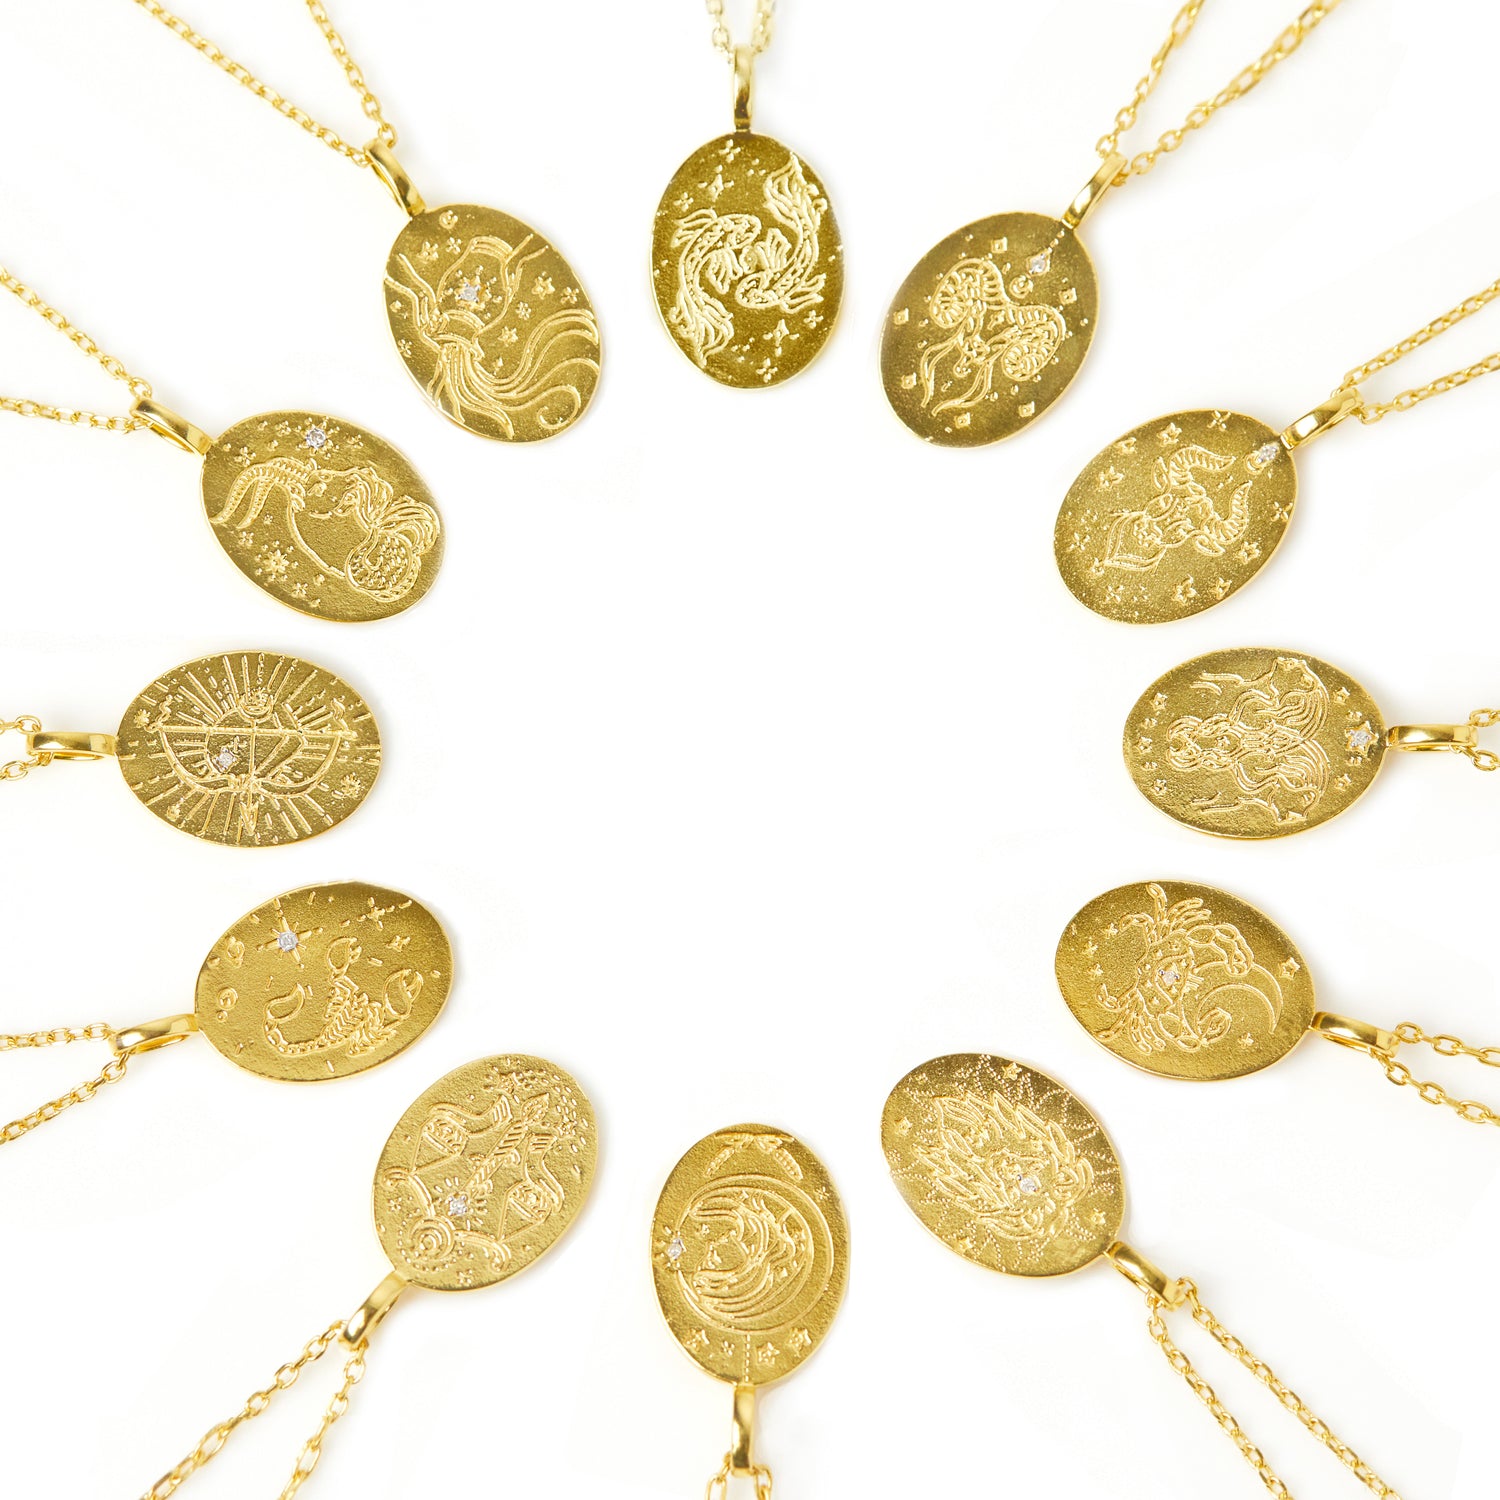 Gorgeous gold vermeil necklaces crafted by Carrie Elizabeth Jewellery 